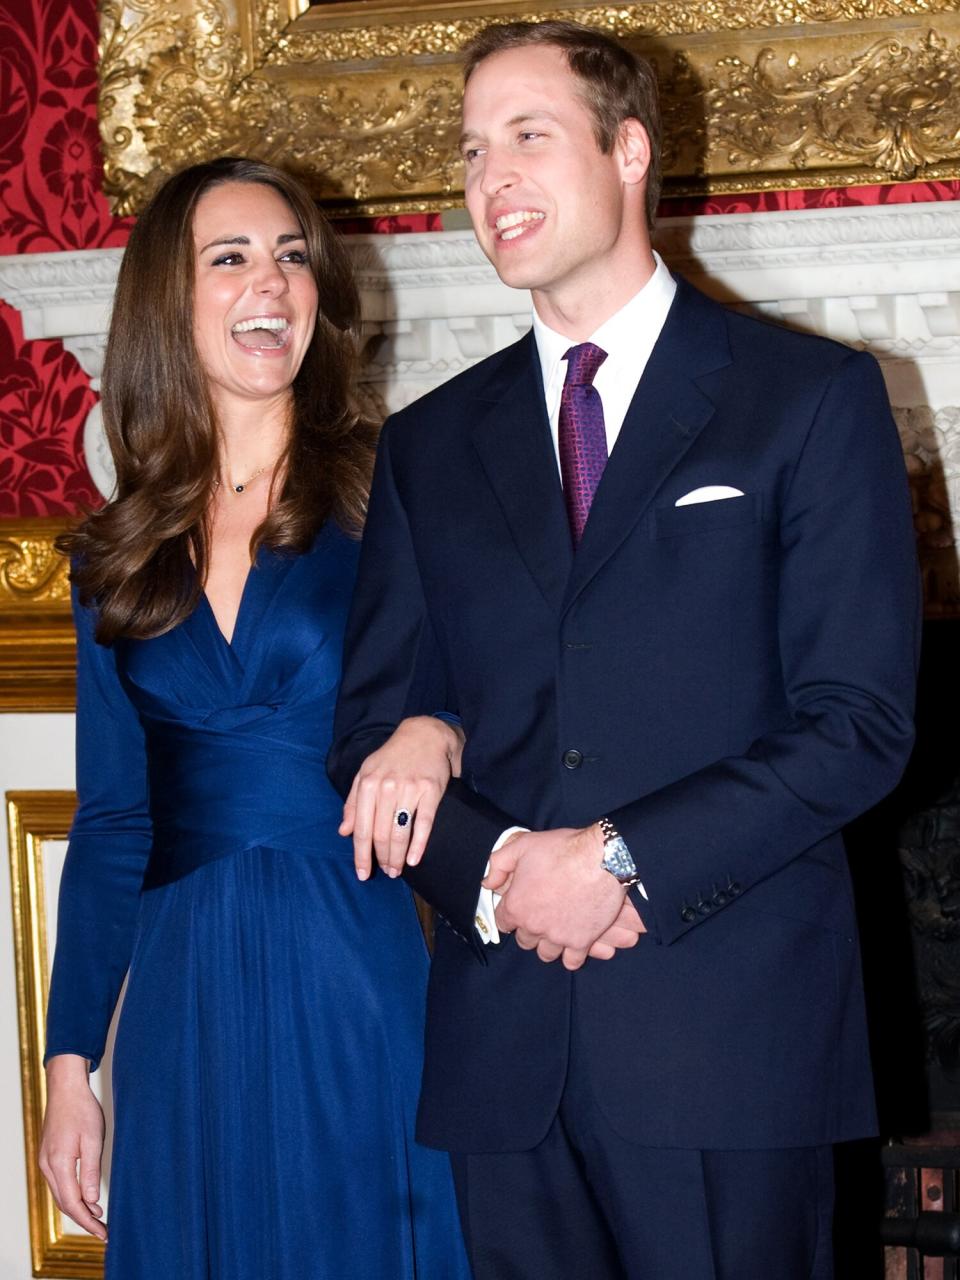 Prince William and Kate Middleton pose for photographs in the State Apartments of St James Palace on November 16, 2010 in London, England